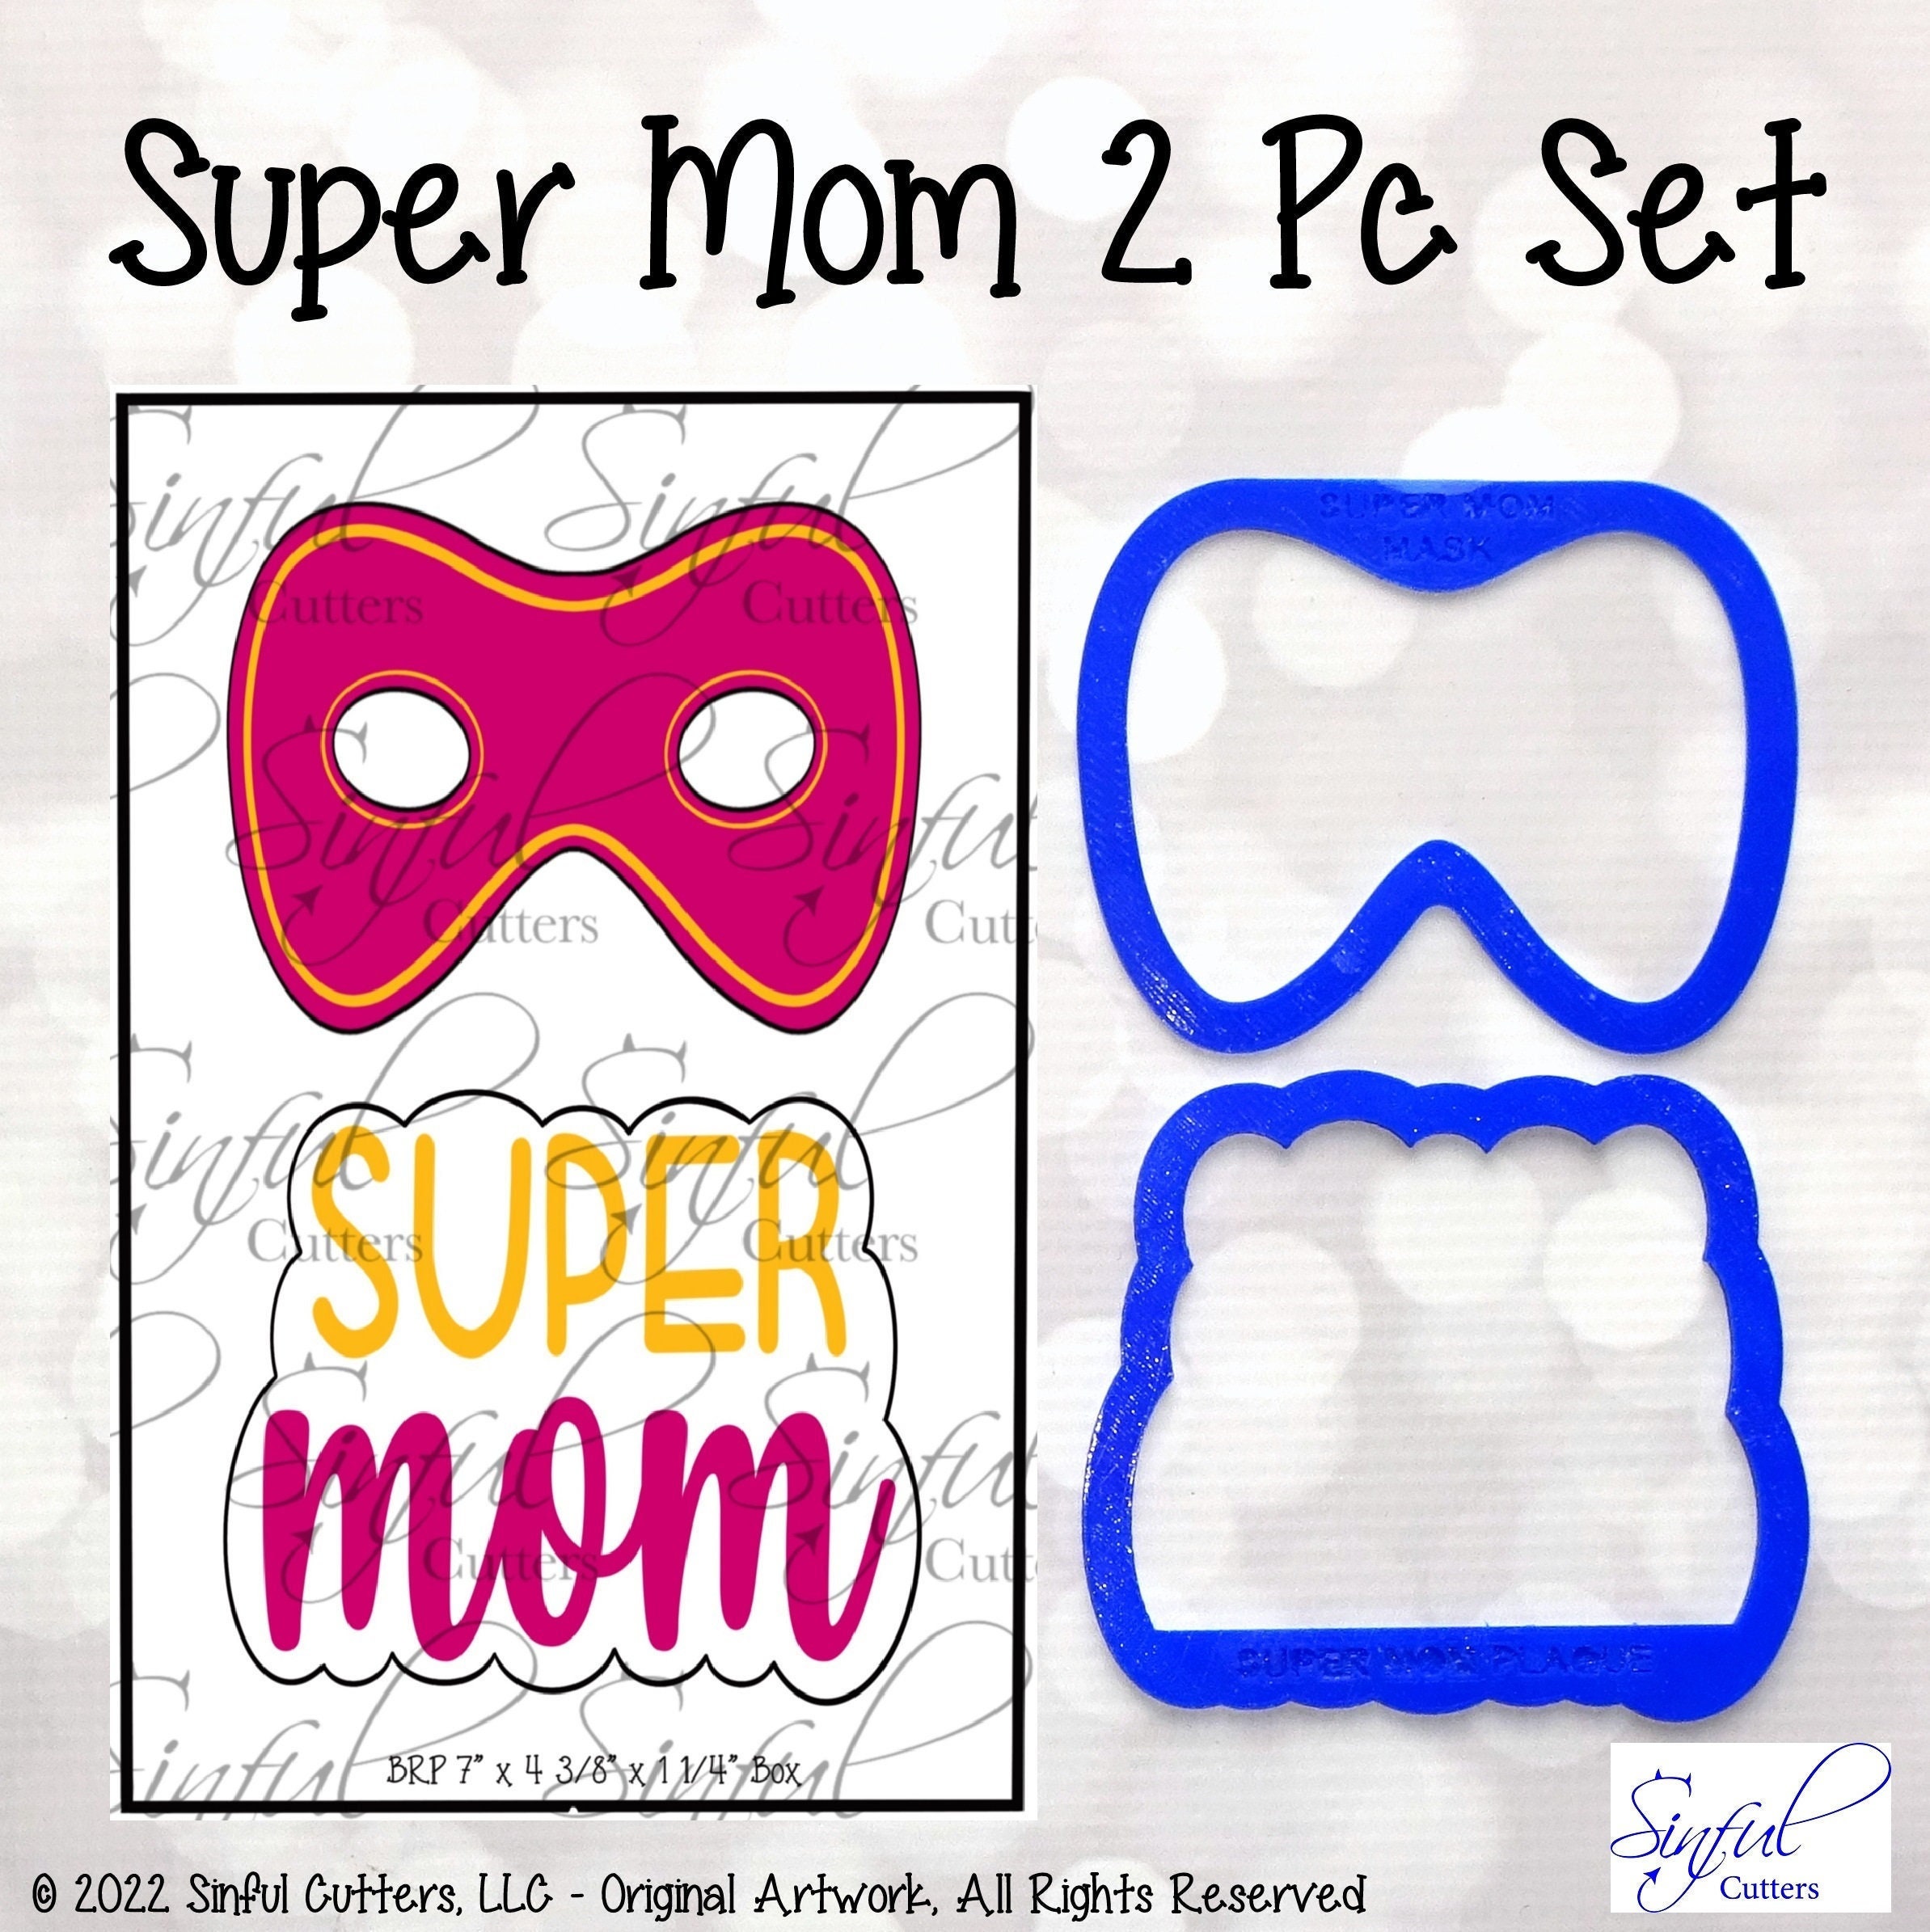 Super Mom 2 Pc Set Mother's Day Cookie Cutters / Fondant Cutters